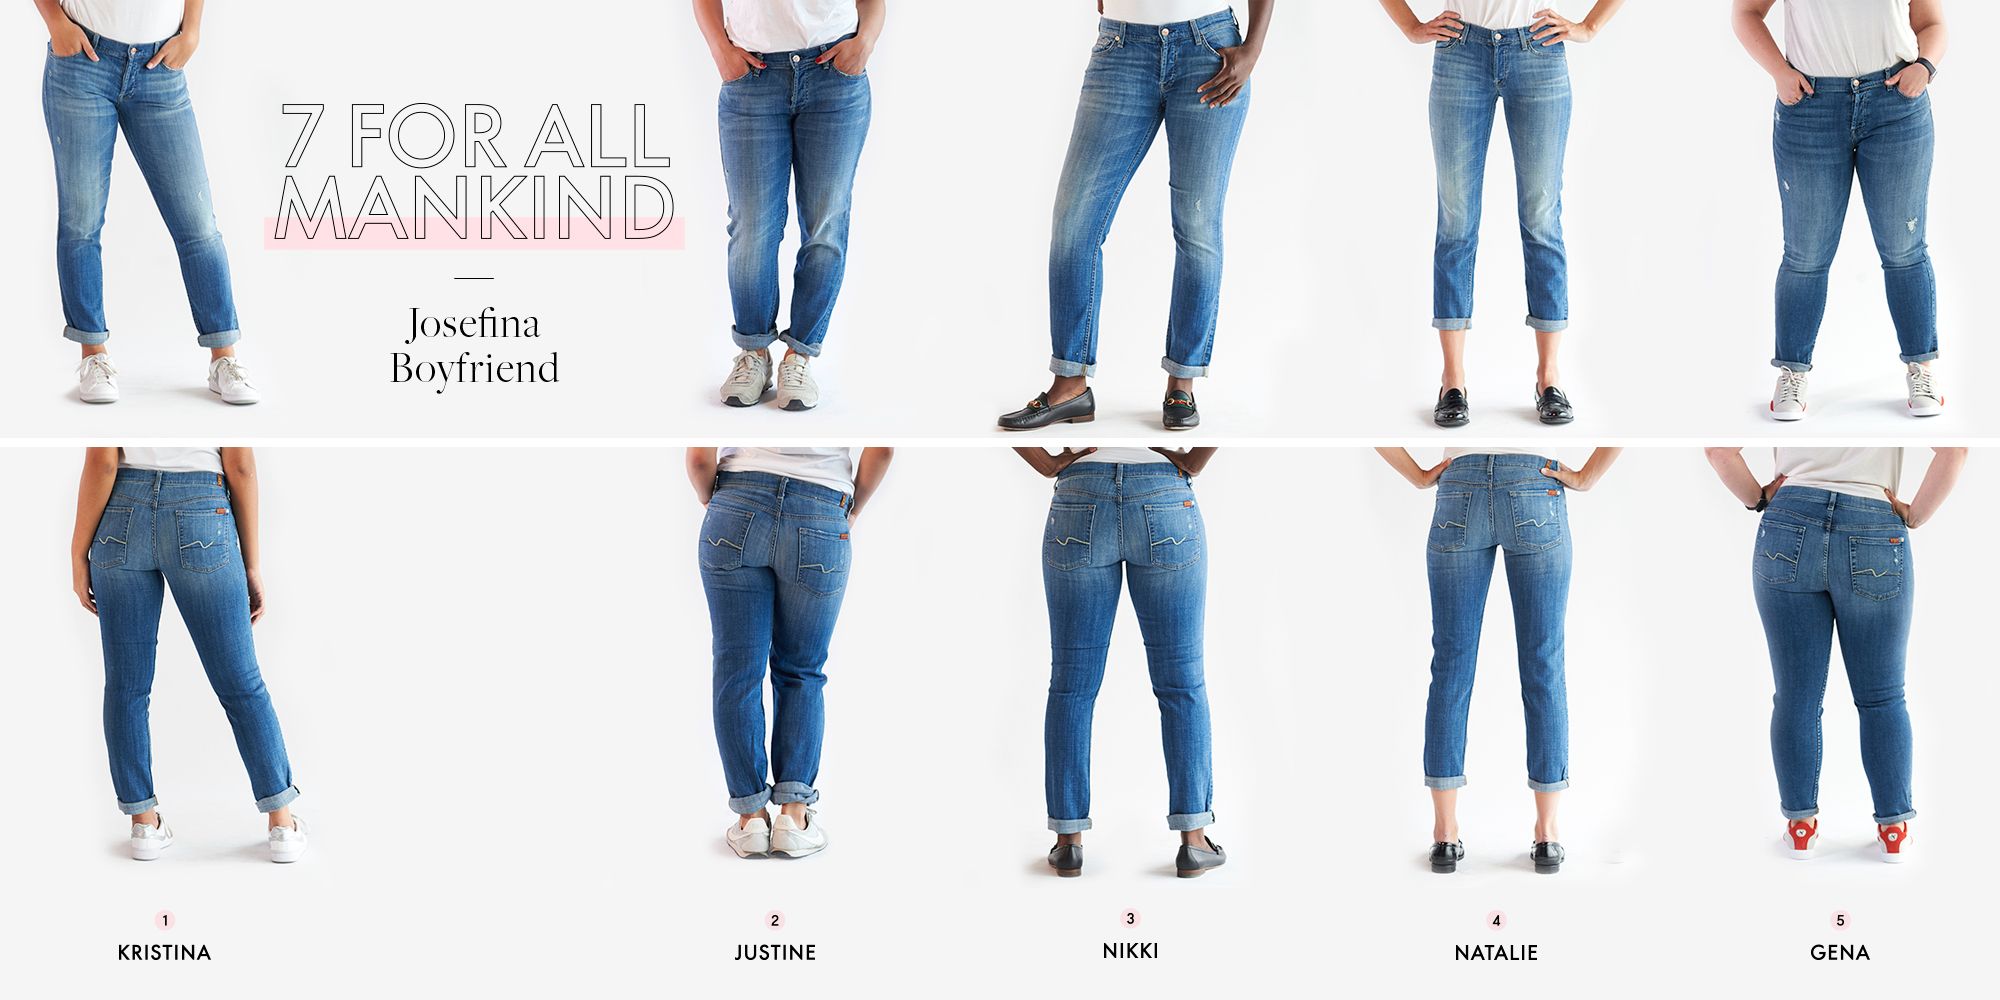 Women's Low Rise Jeans - Denim for Women | 7 For All Mankind